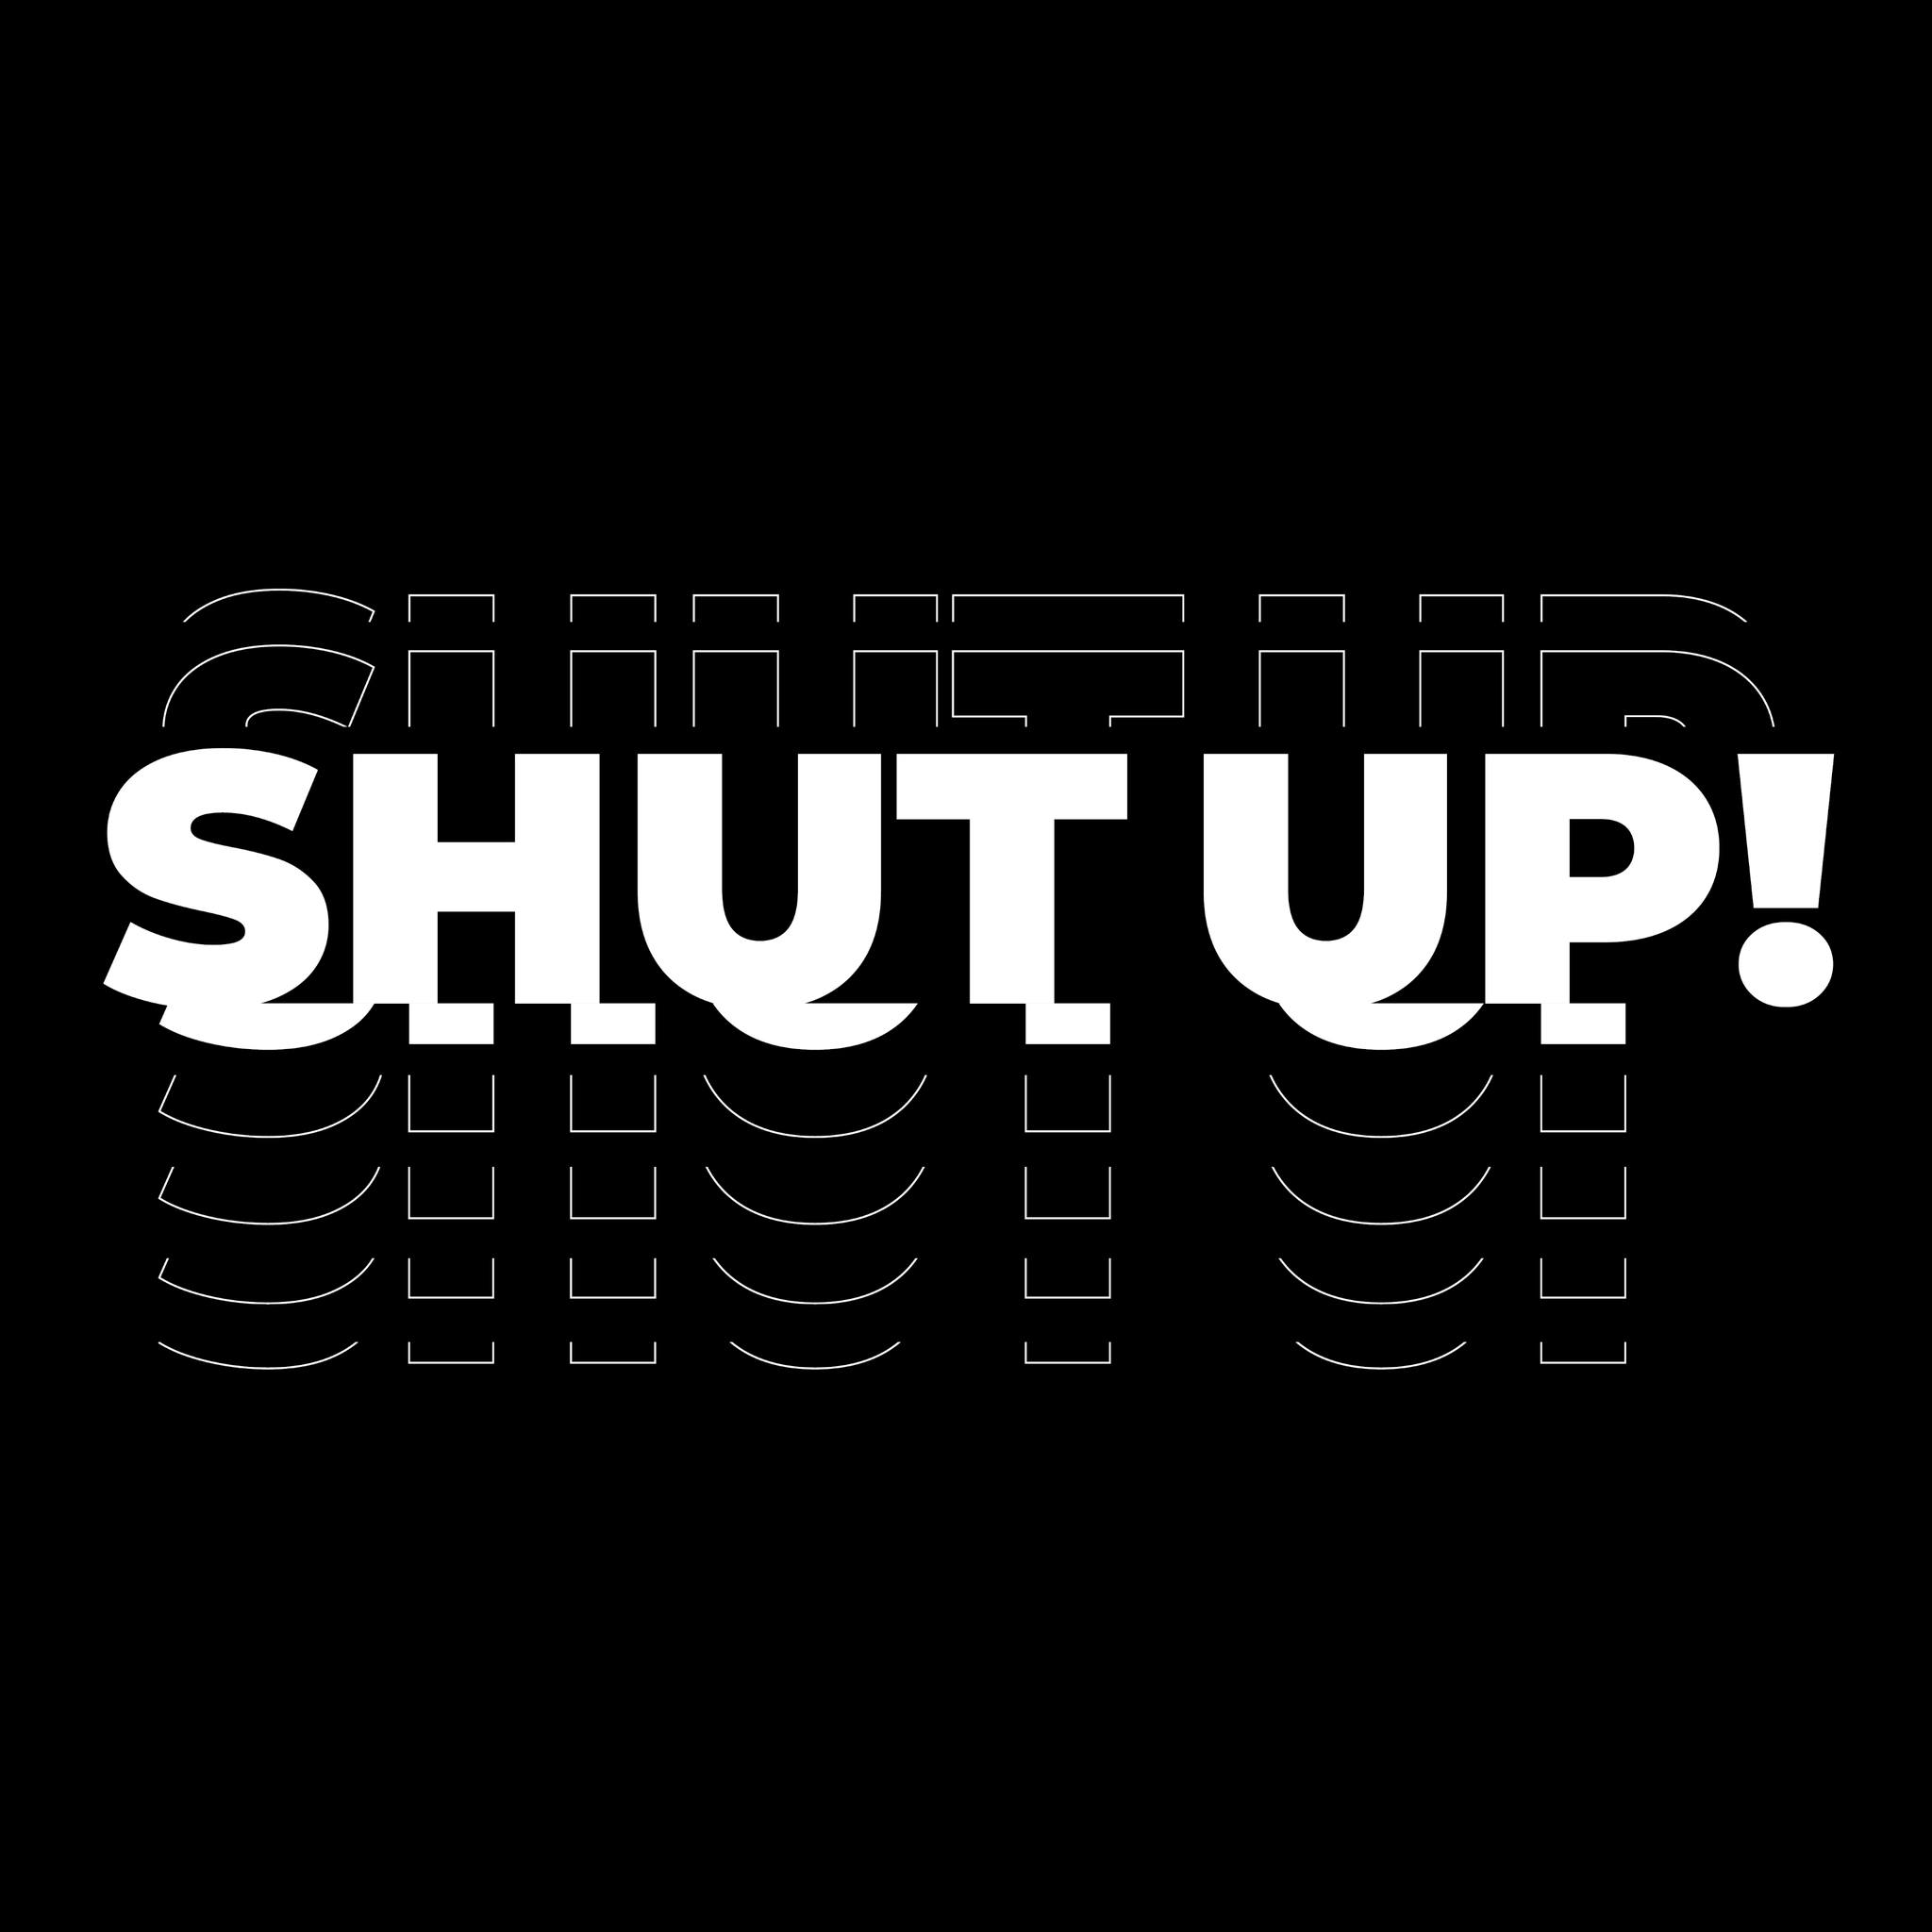 417538517 883183340484280 829446178138362268 n 89238 Shut Up! Drum and Bass